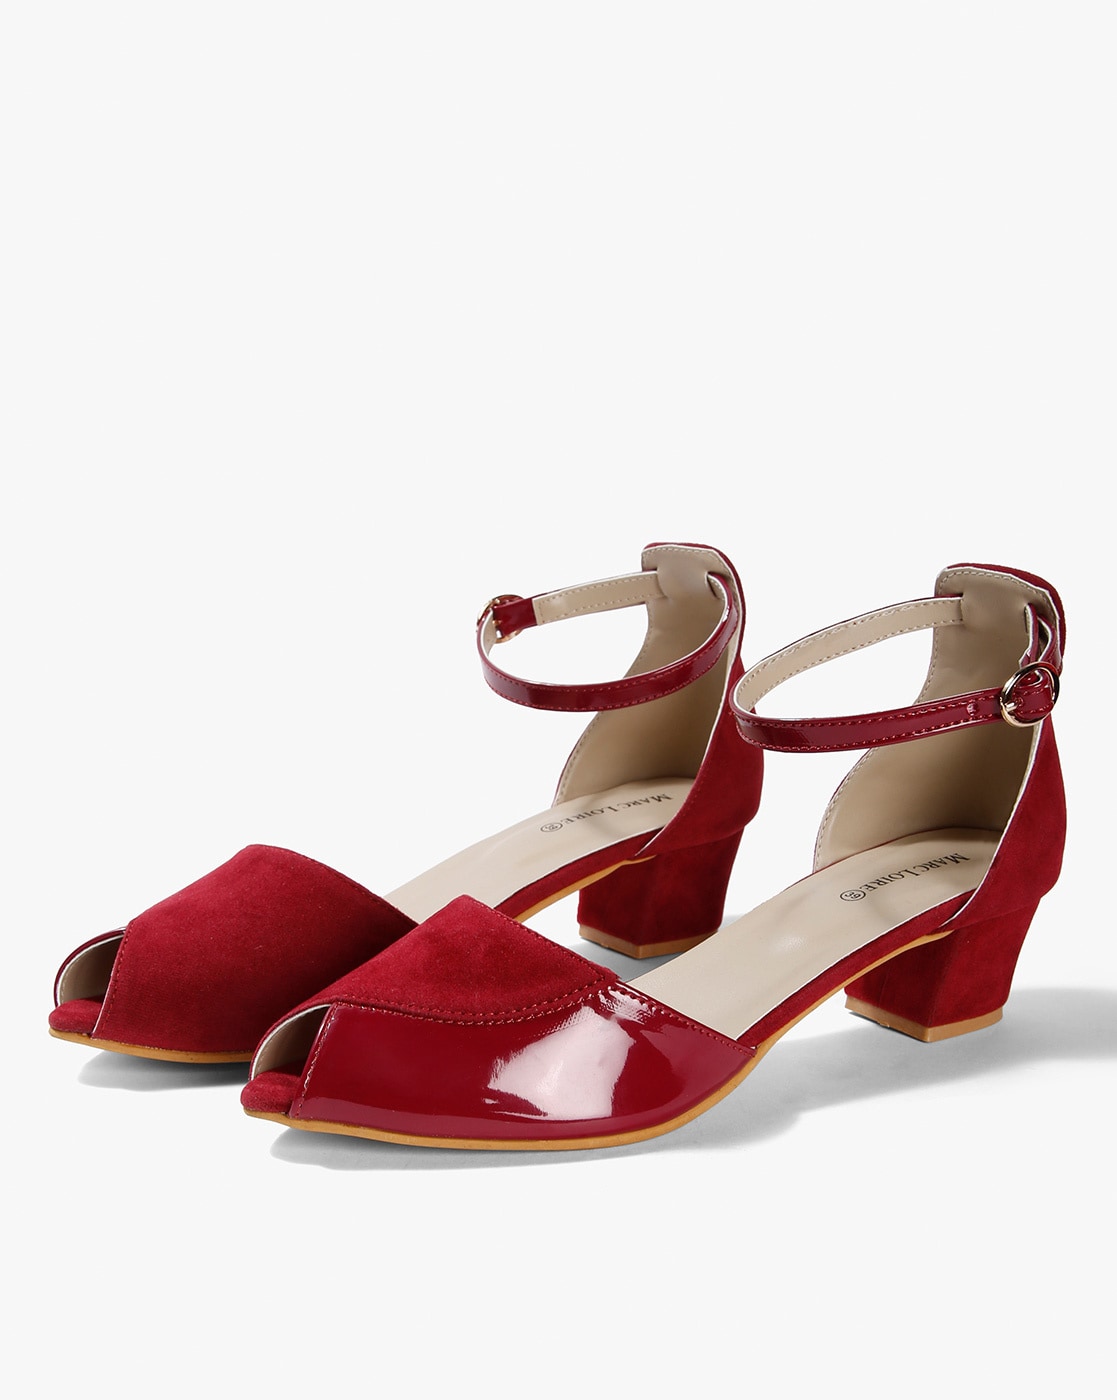 red wedges closed toe